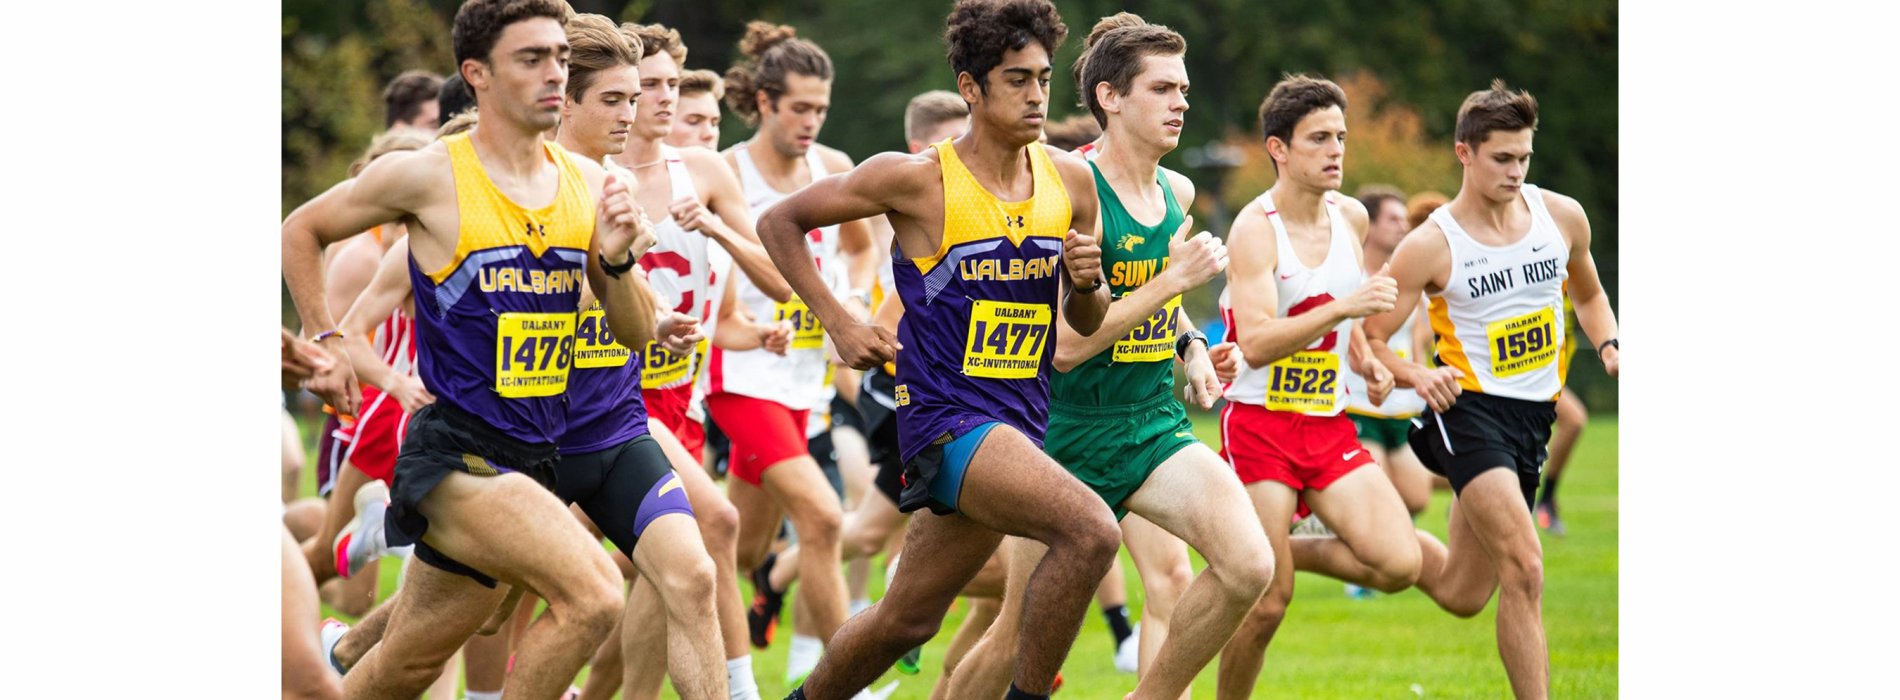 UAlbany men's cross country competes in an event.